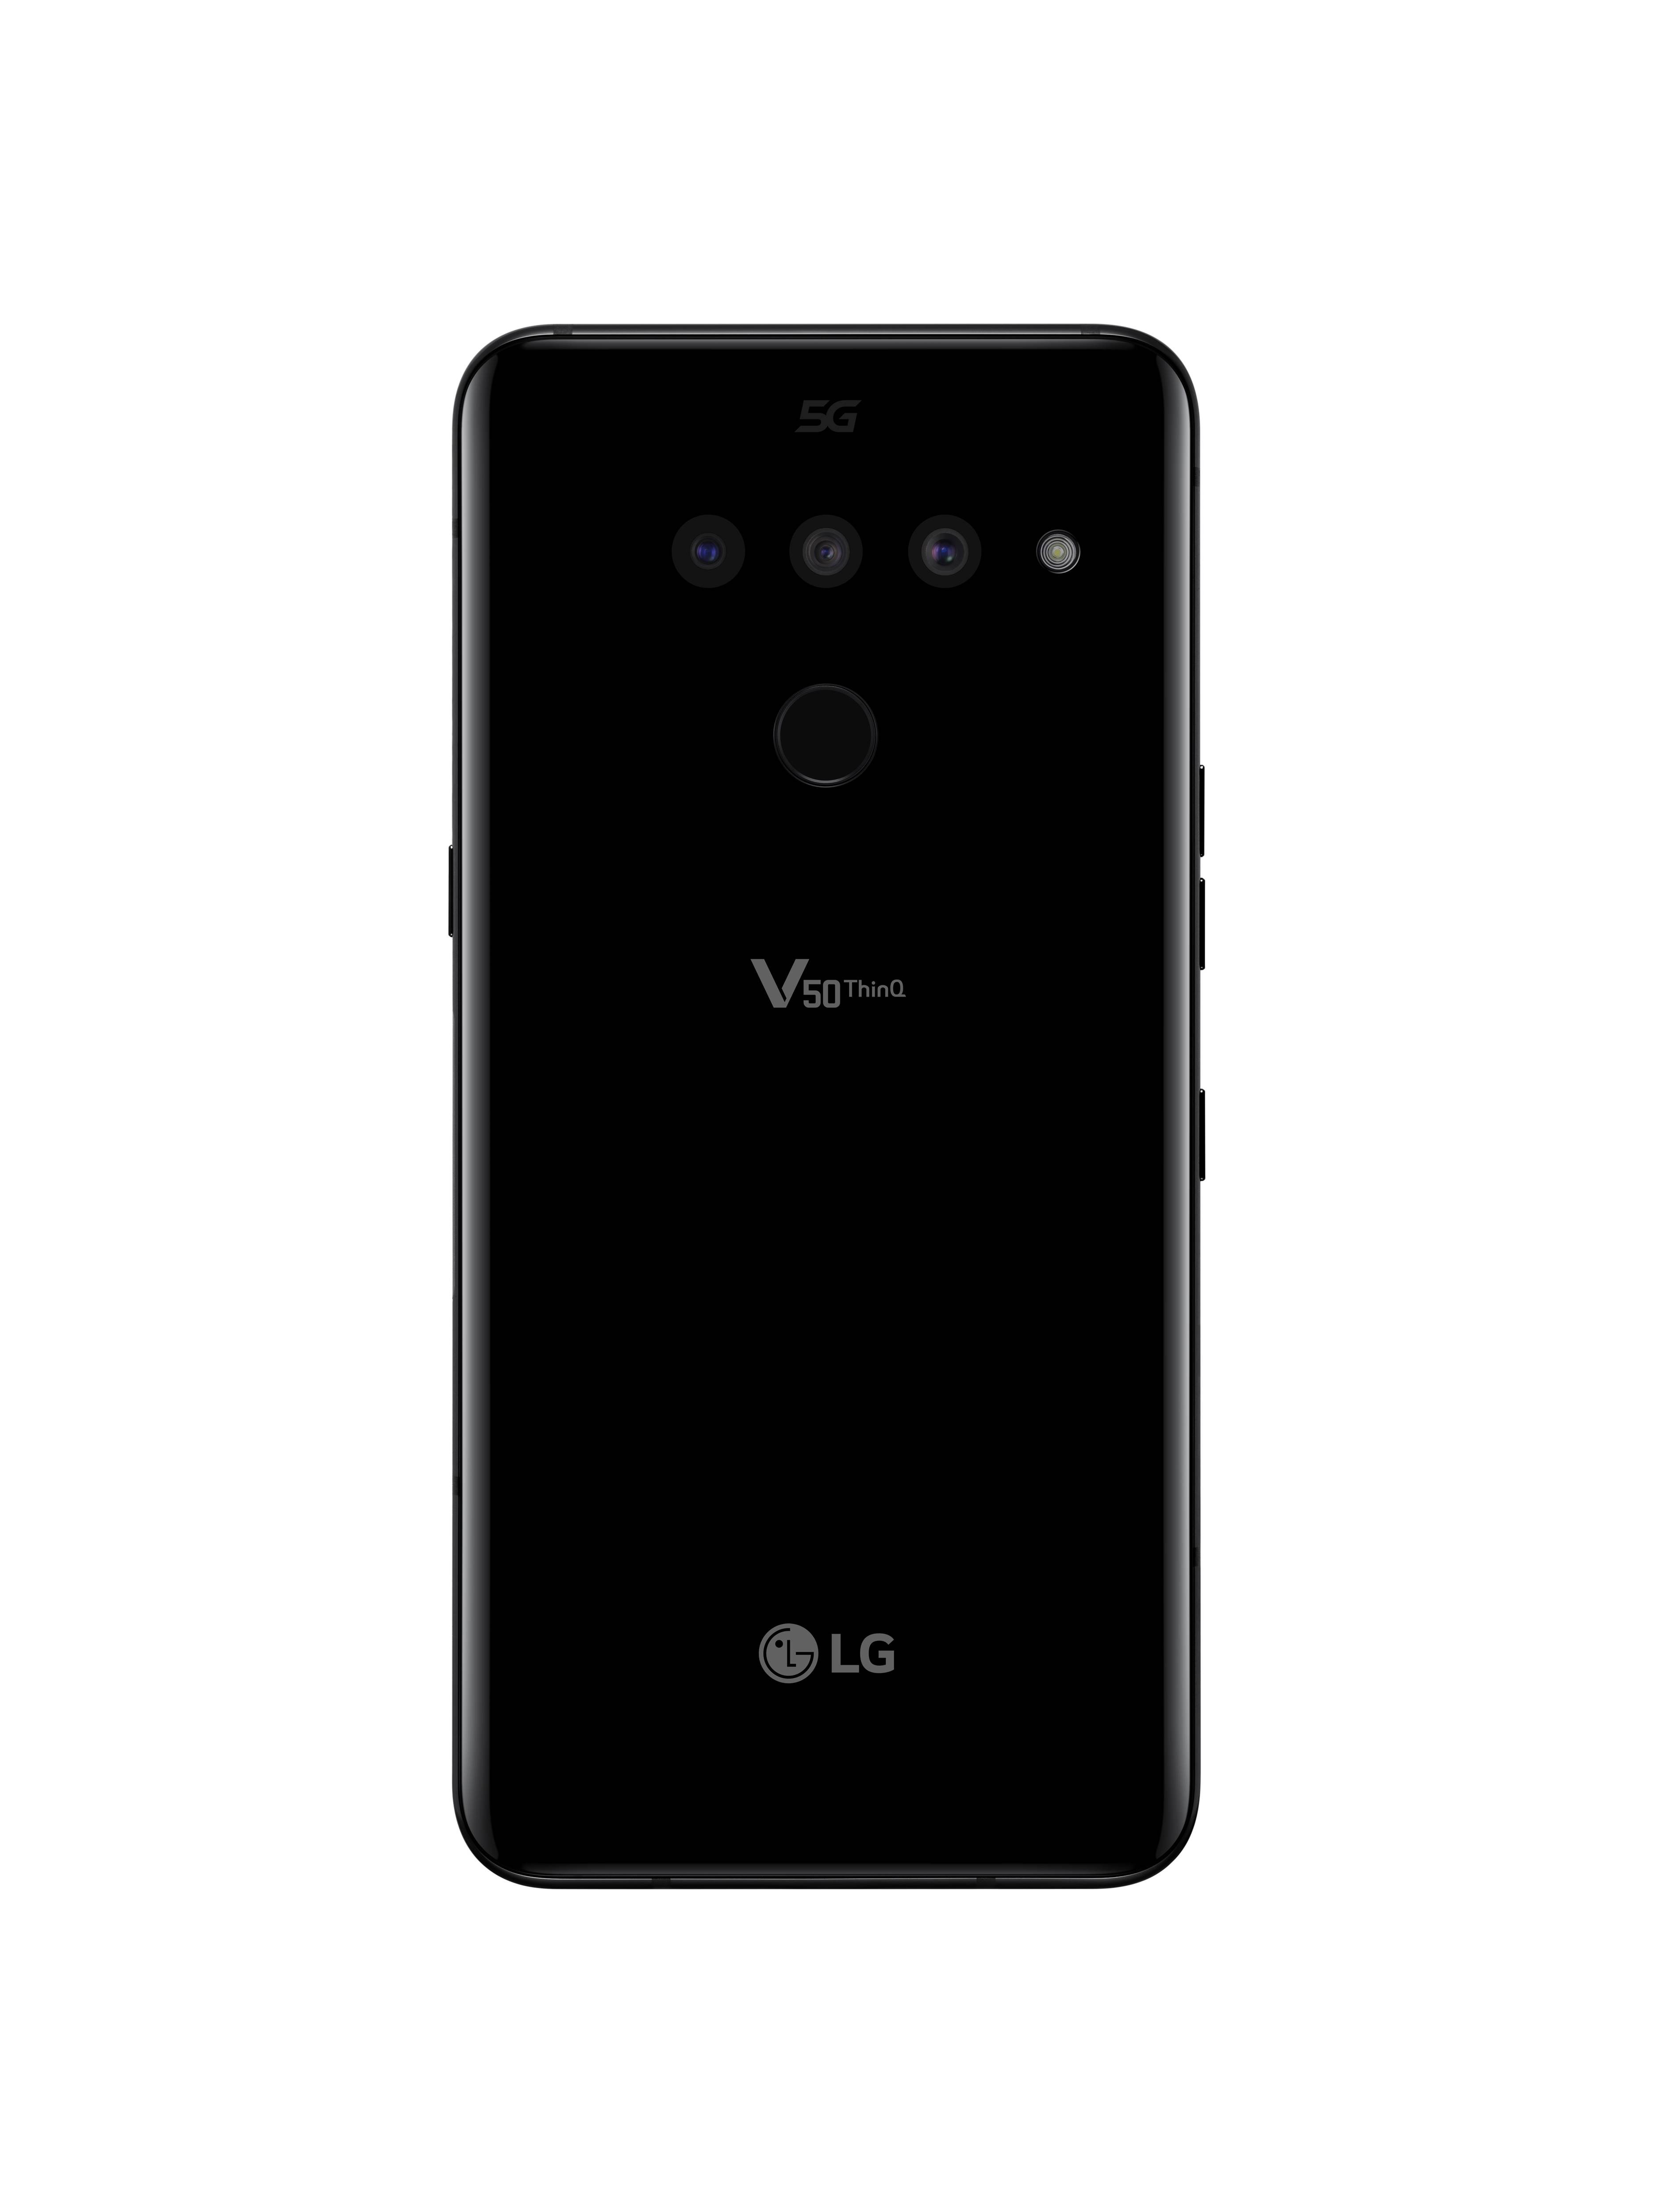 The rear view of the LG V50 ThinQ 5G in New Aurora Black